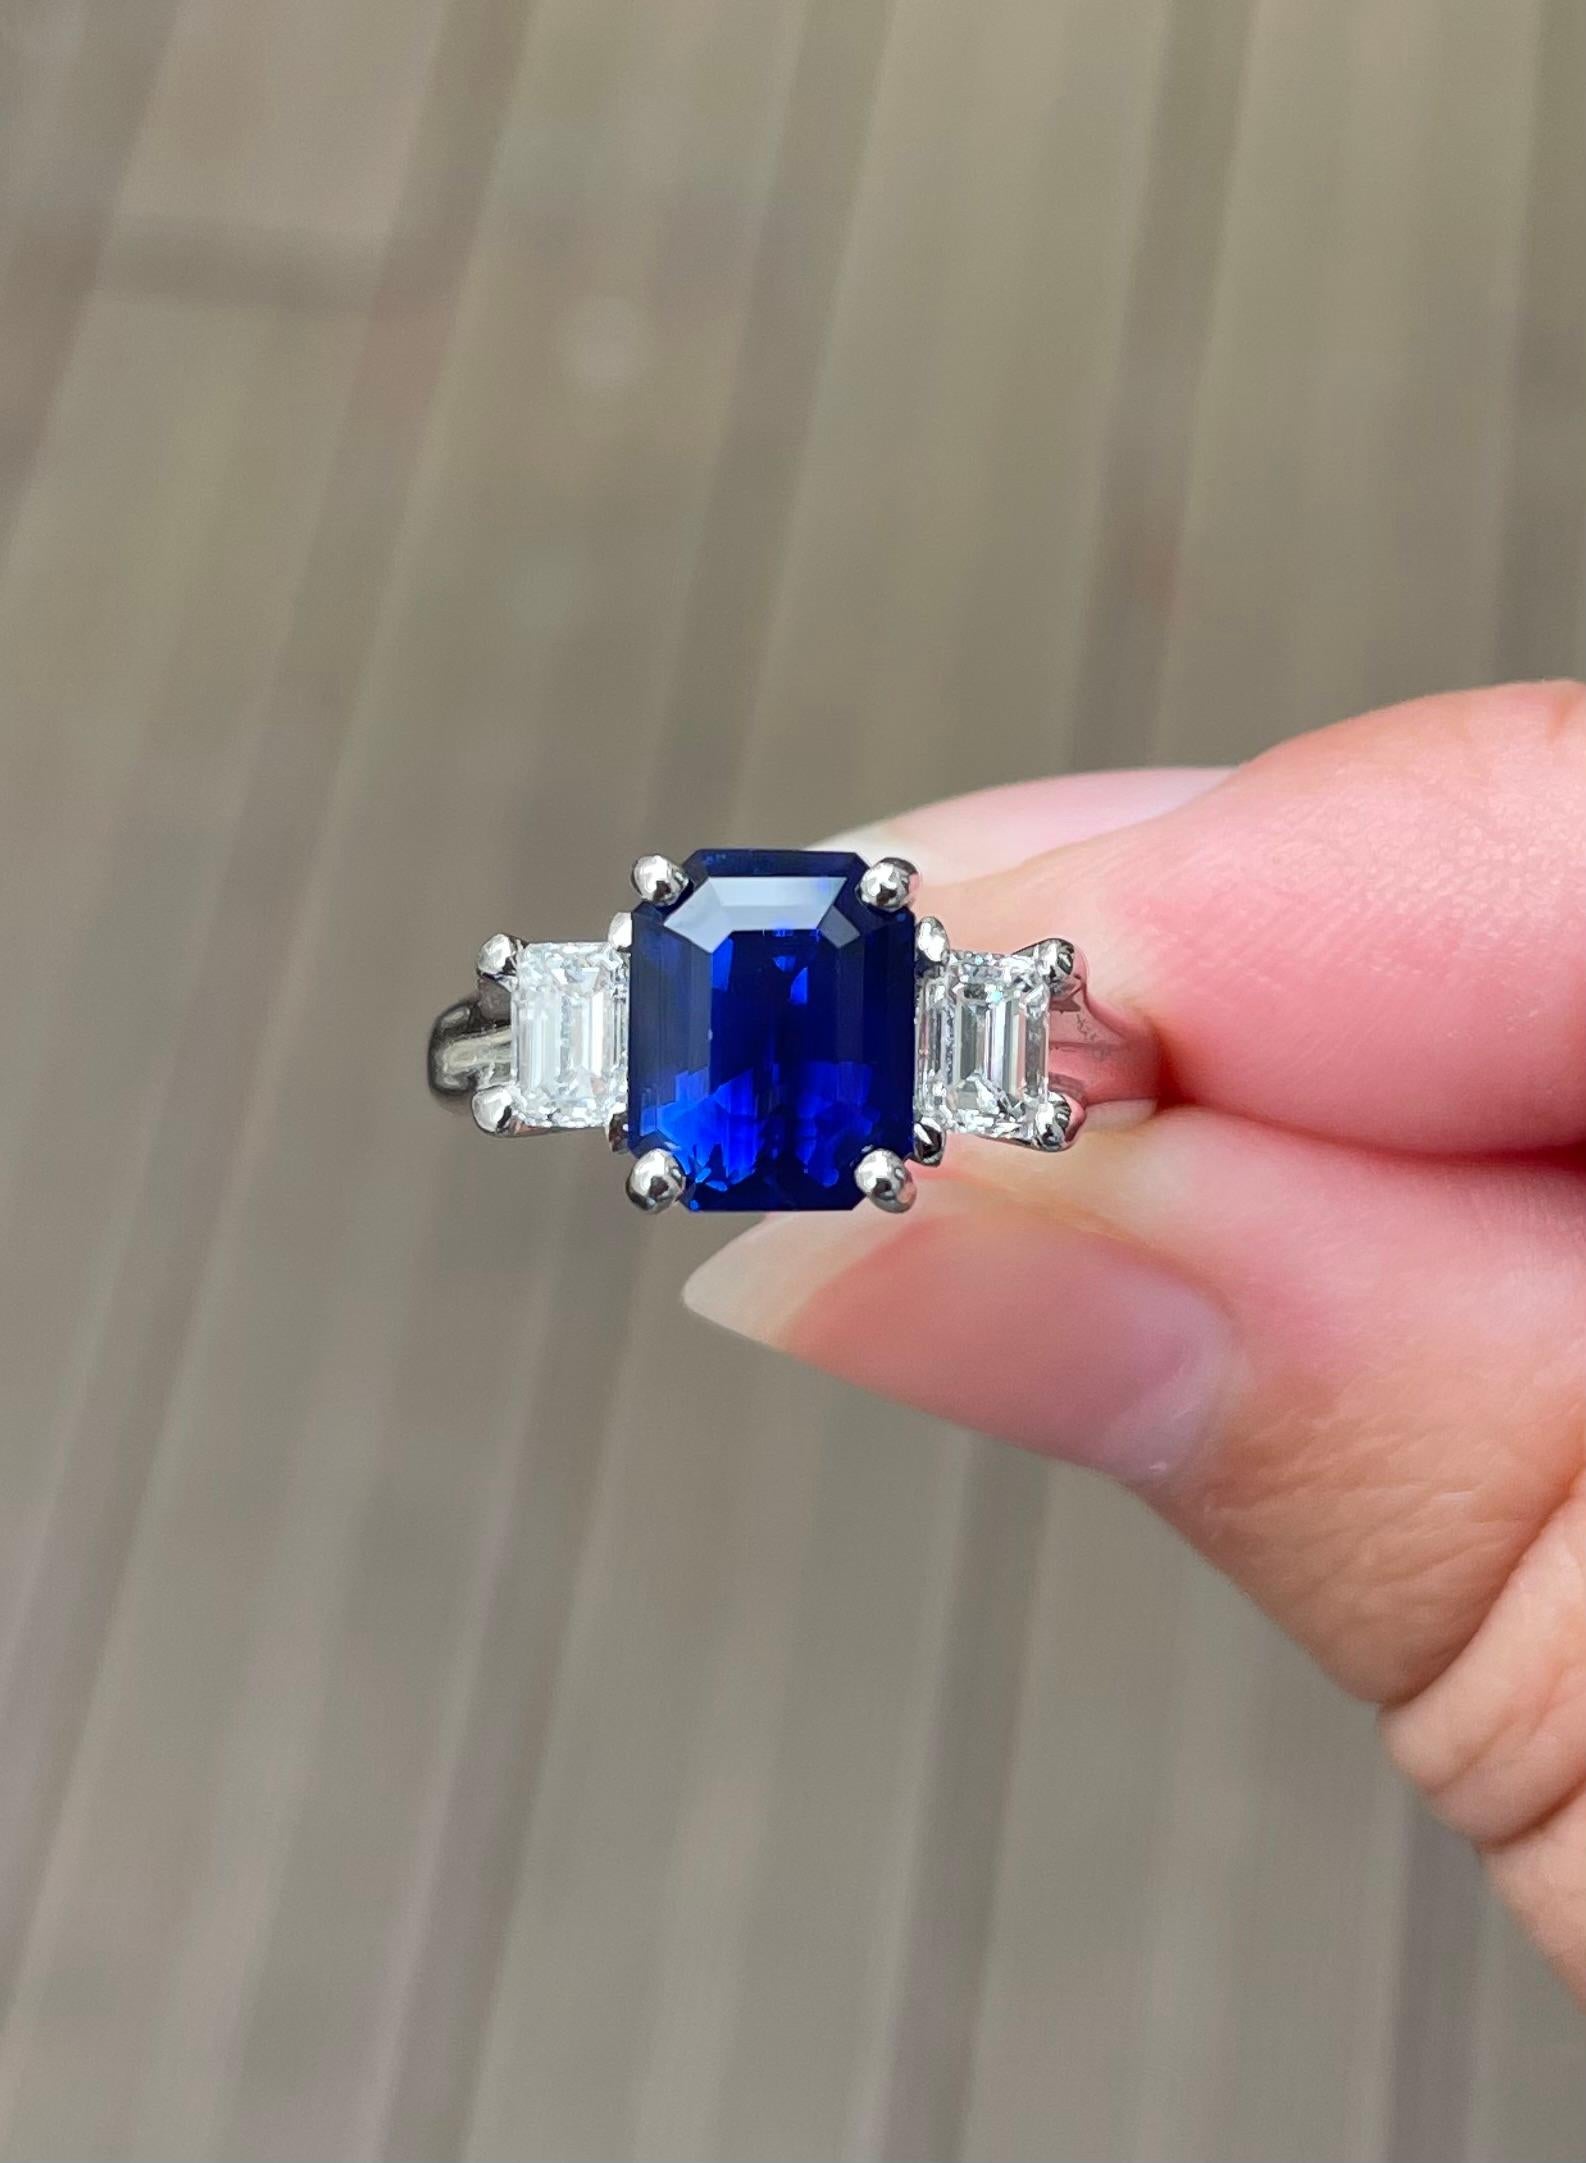 Regal and elegant, this exceptional sapphire would be an important piece in any jewelry collection. The 3.93 carat emerald cut sapphire is a rich, gorgeous cobalt blue. It is quite unusual to find sapphires this shape, making this ring all the more